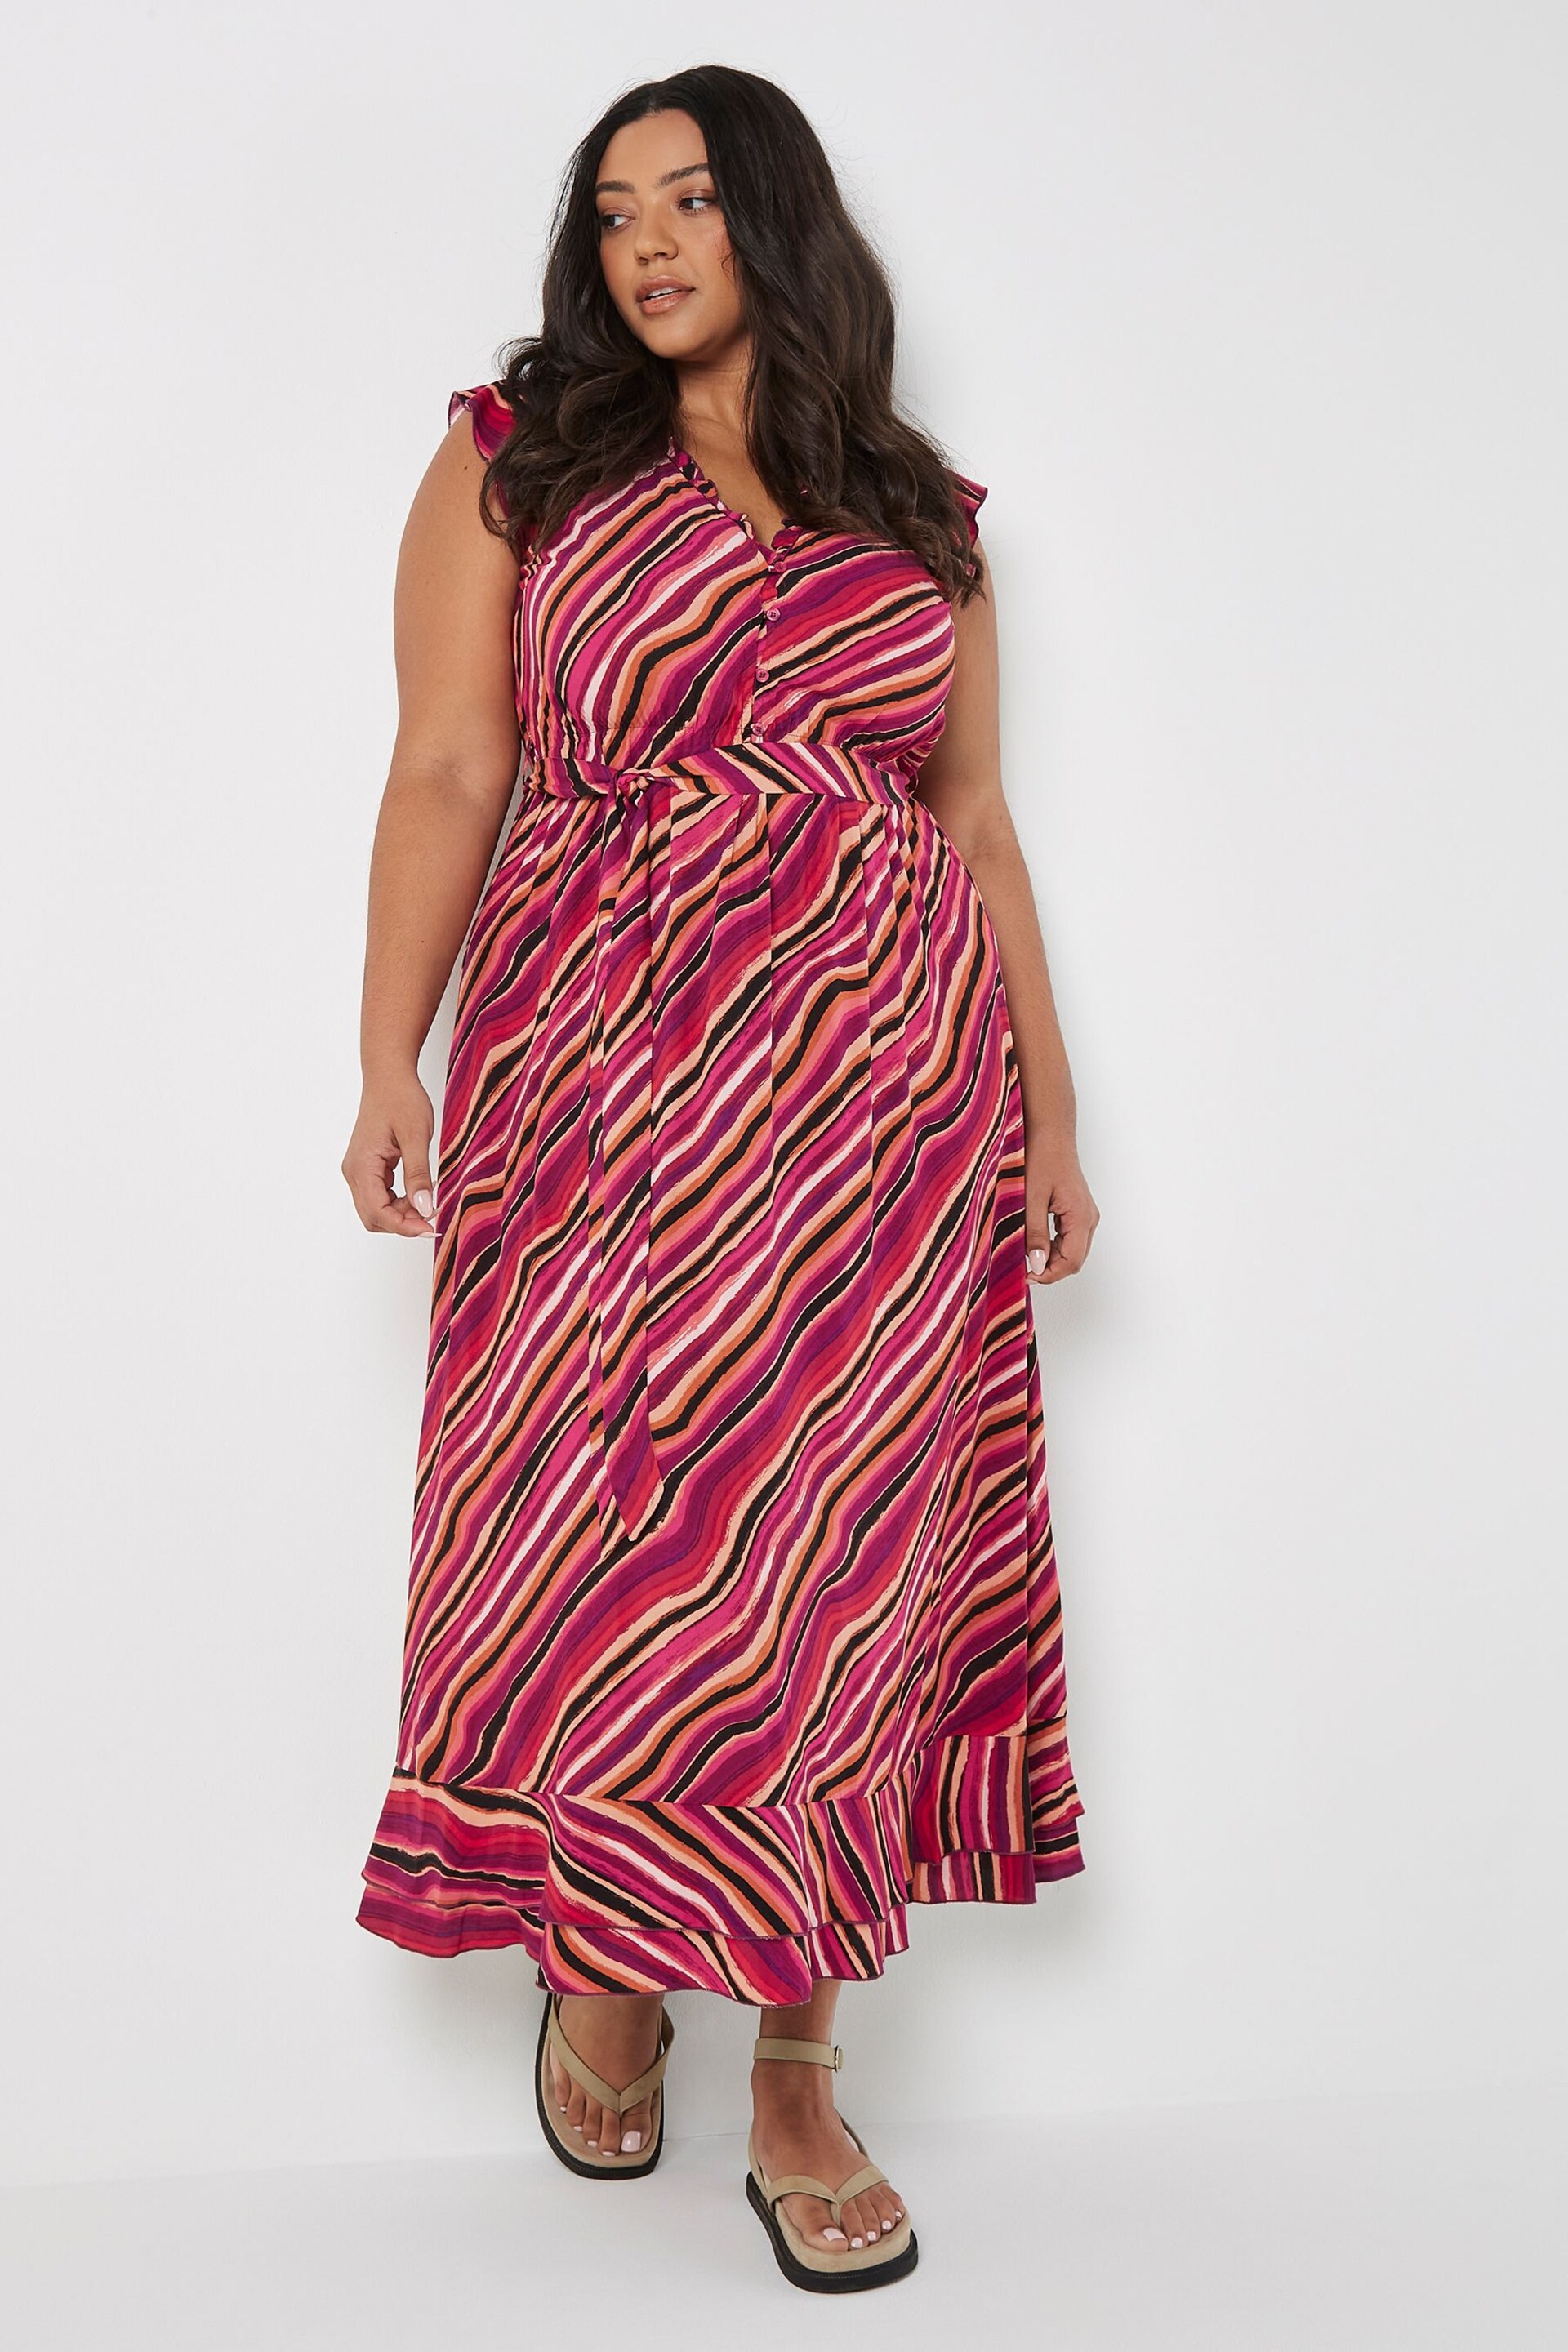 Apricot Pink Psychedelic Wave Ruffle Dress - Image 1 of 4